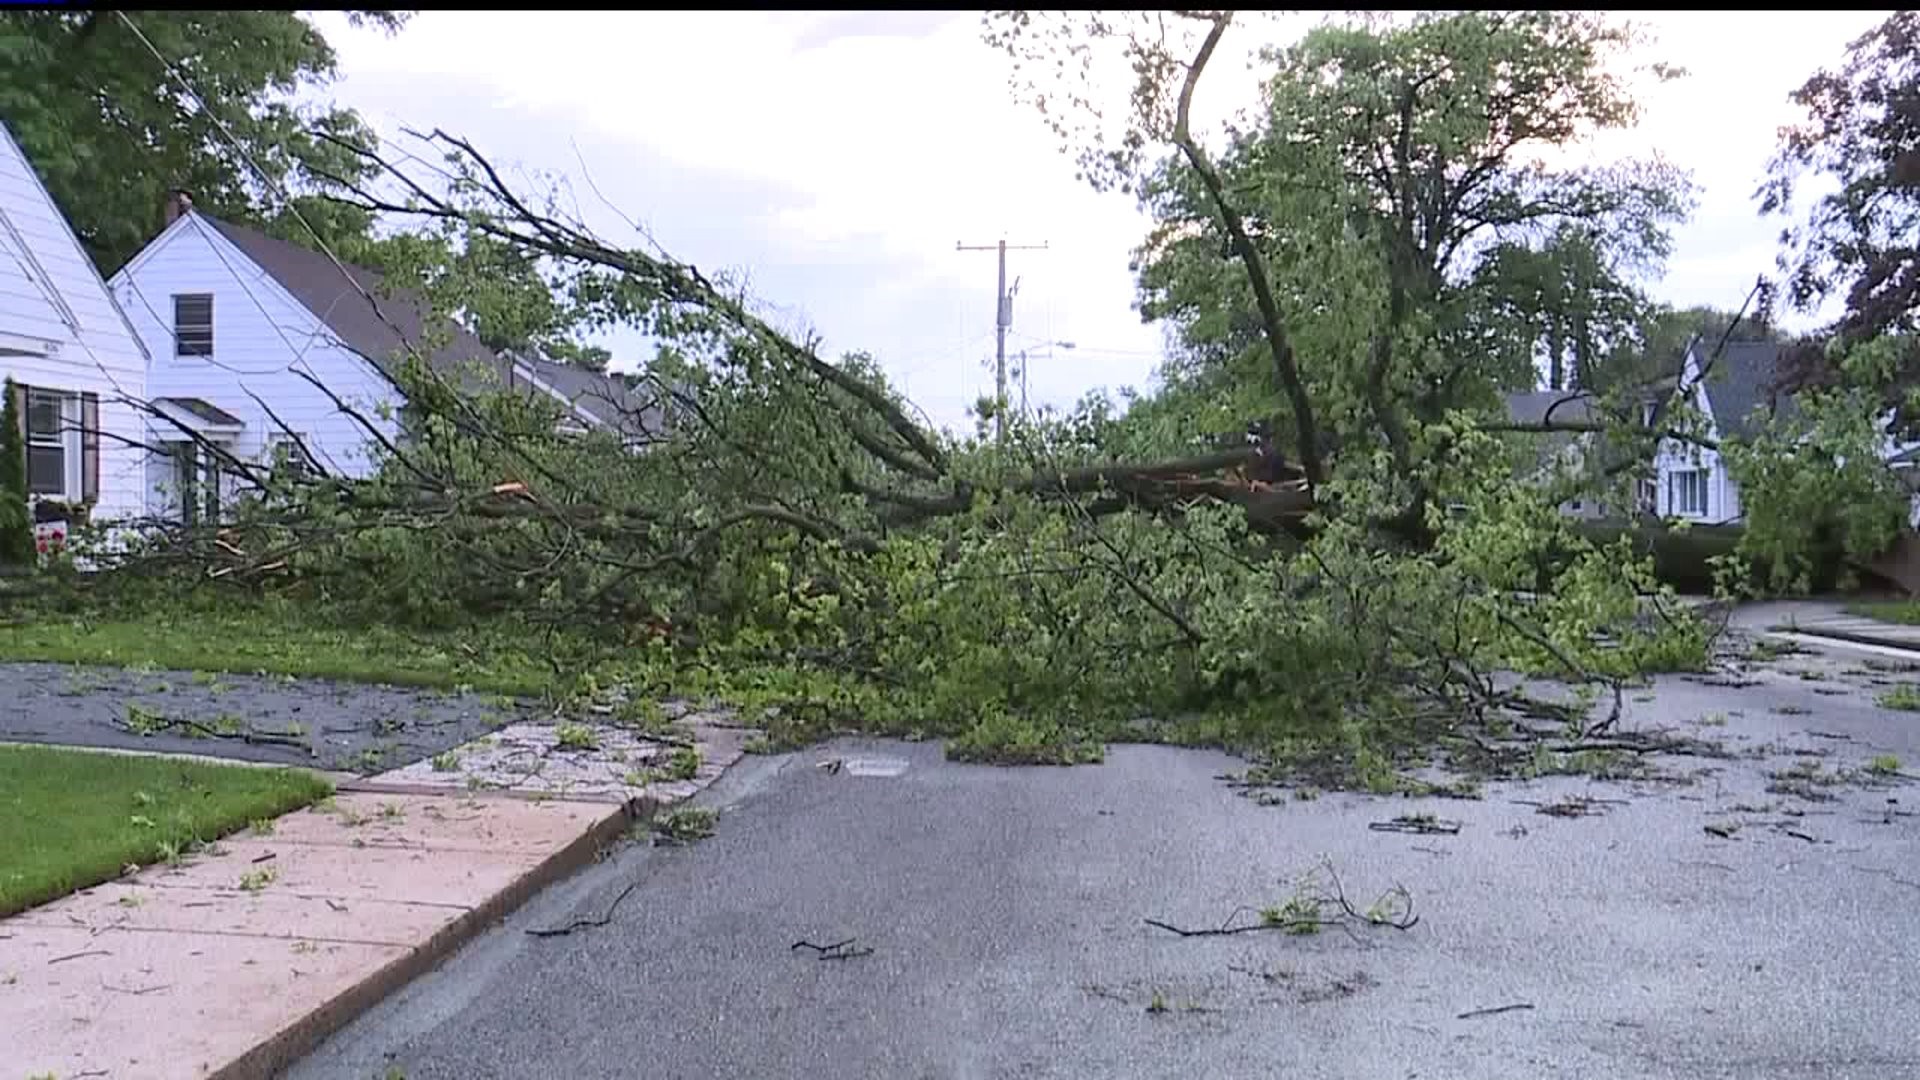 Storms leave widespread damage